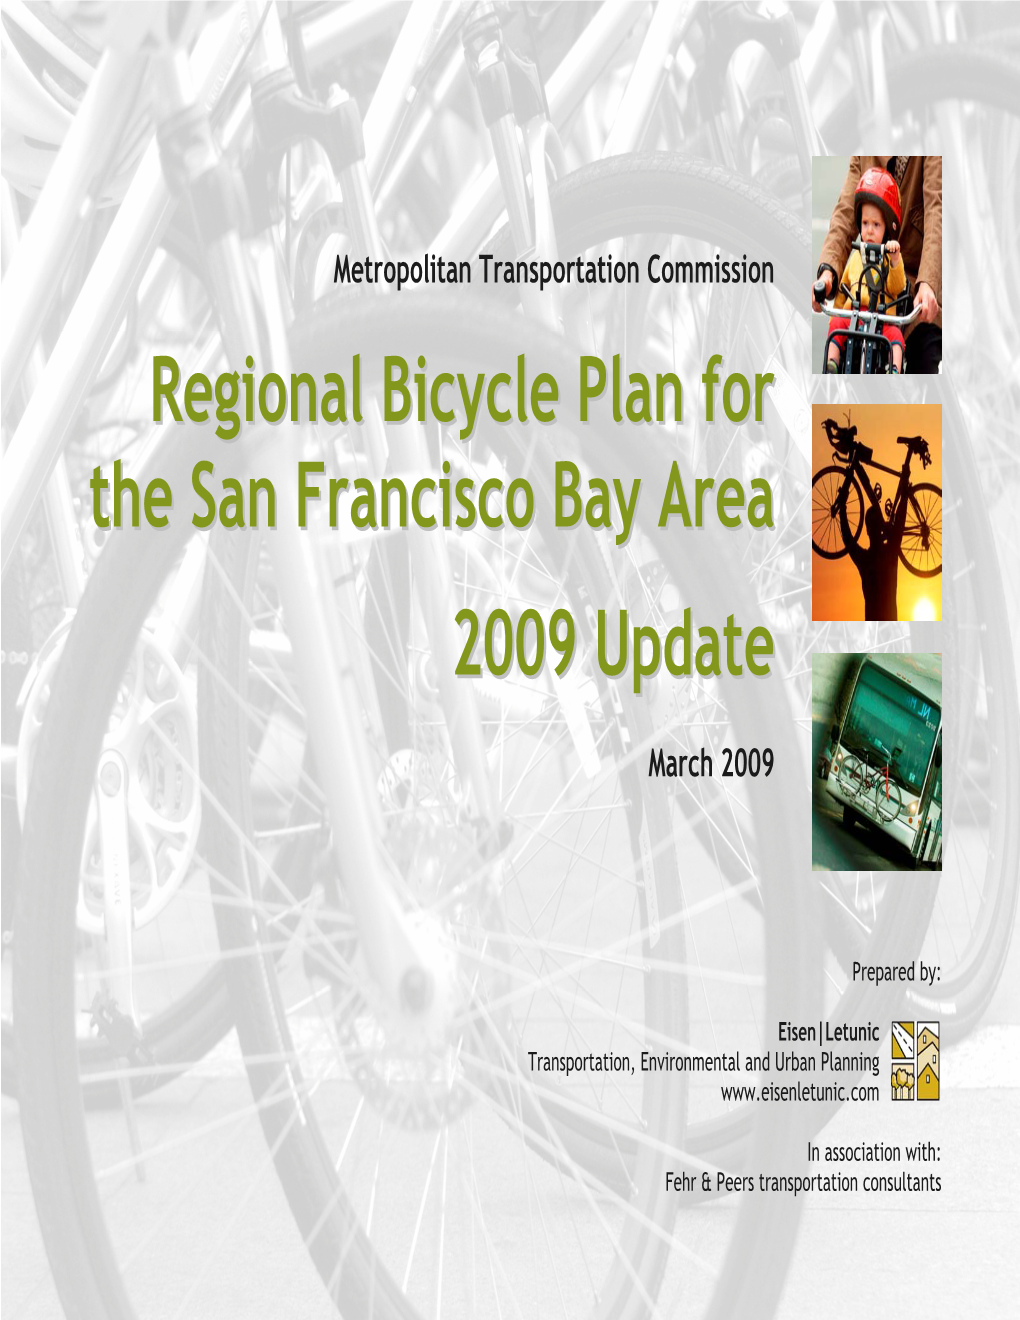 MTC, Regional Bicycle Plan for the San Francisco Bay Area